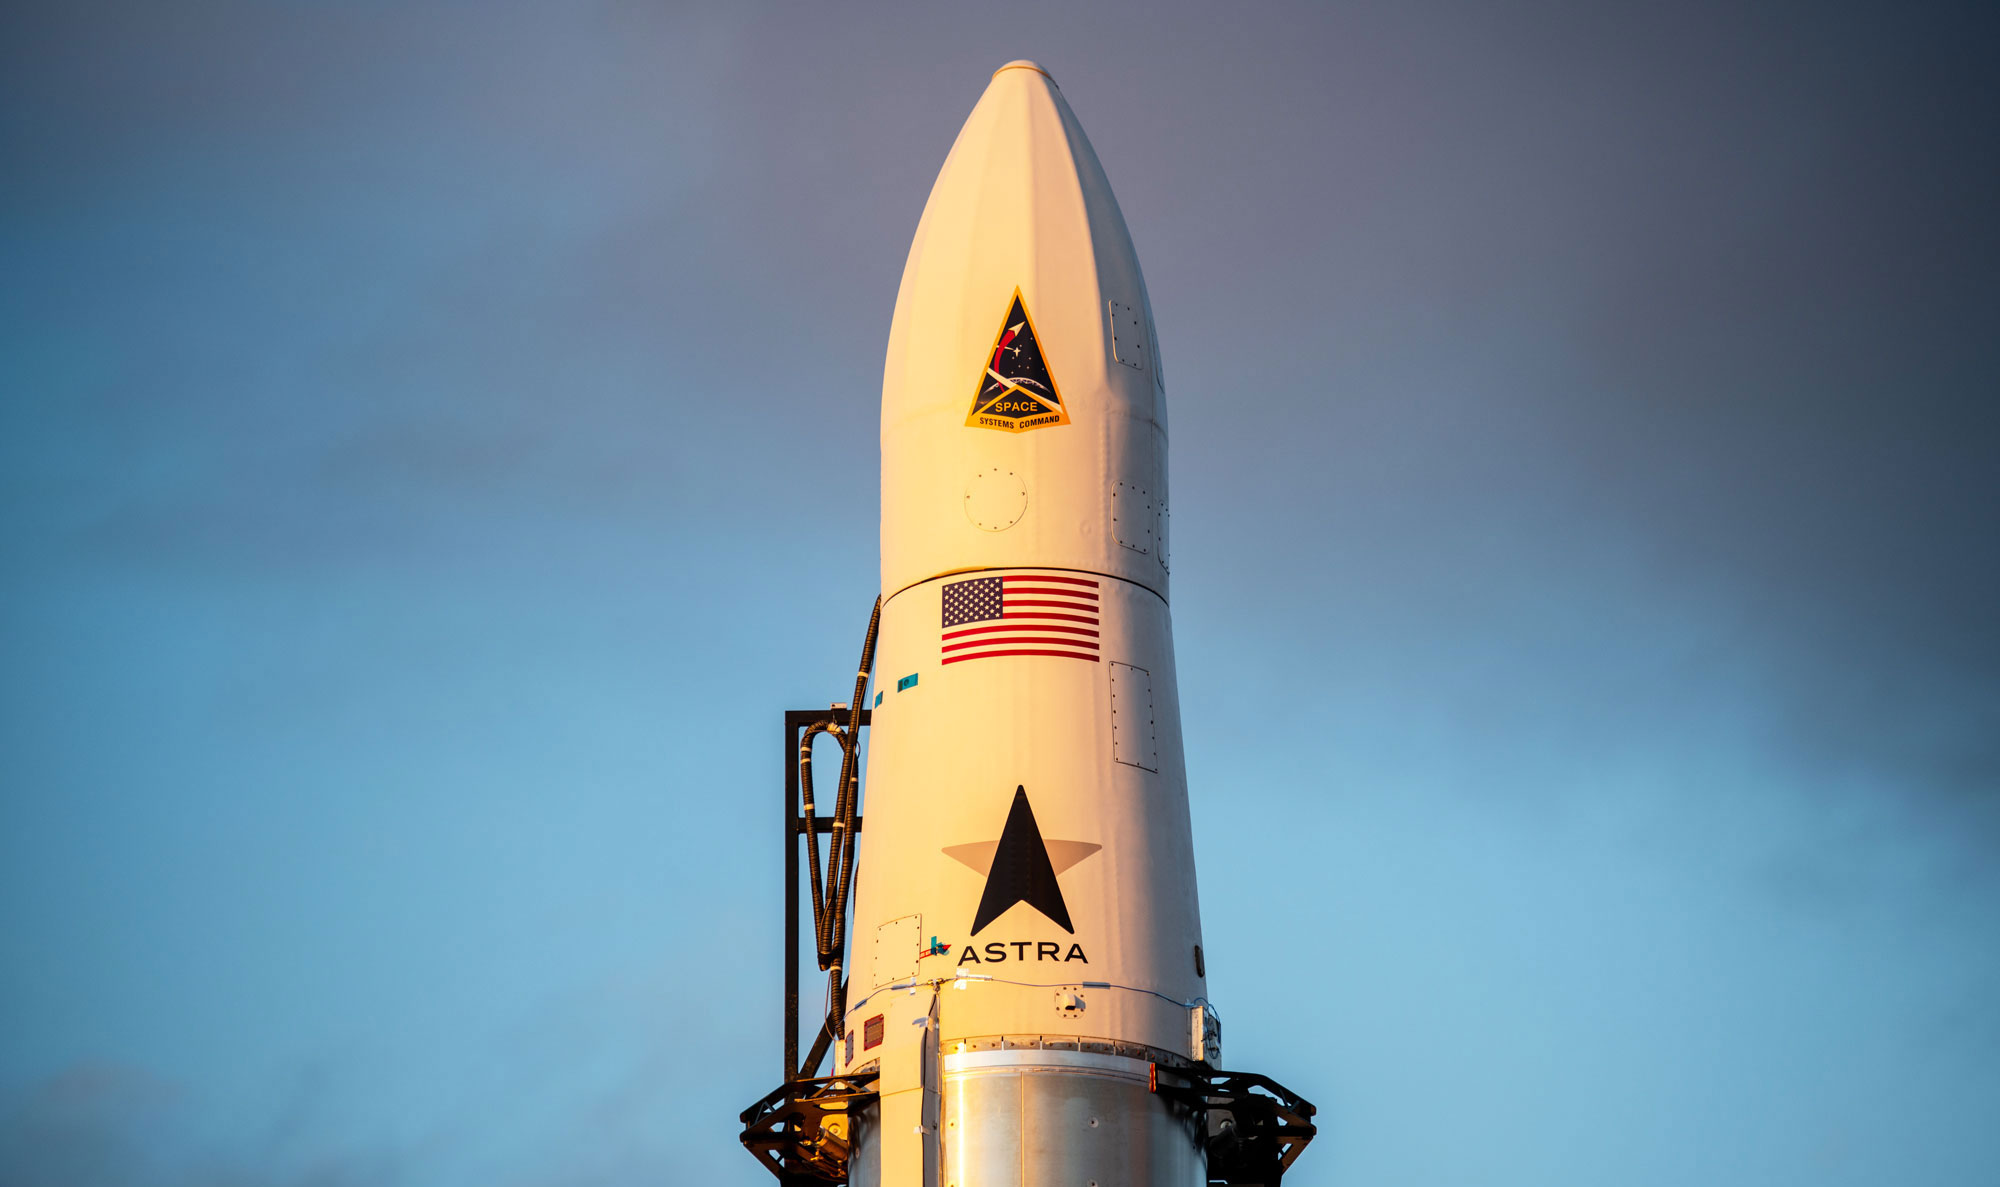 Space Force Awards Astra New Launch Order For Rocket 4 Astra